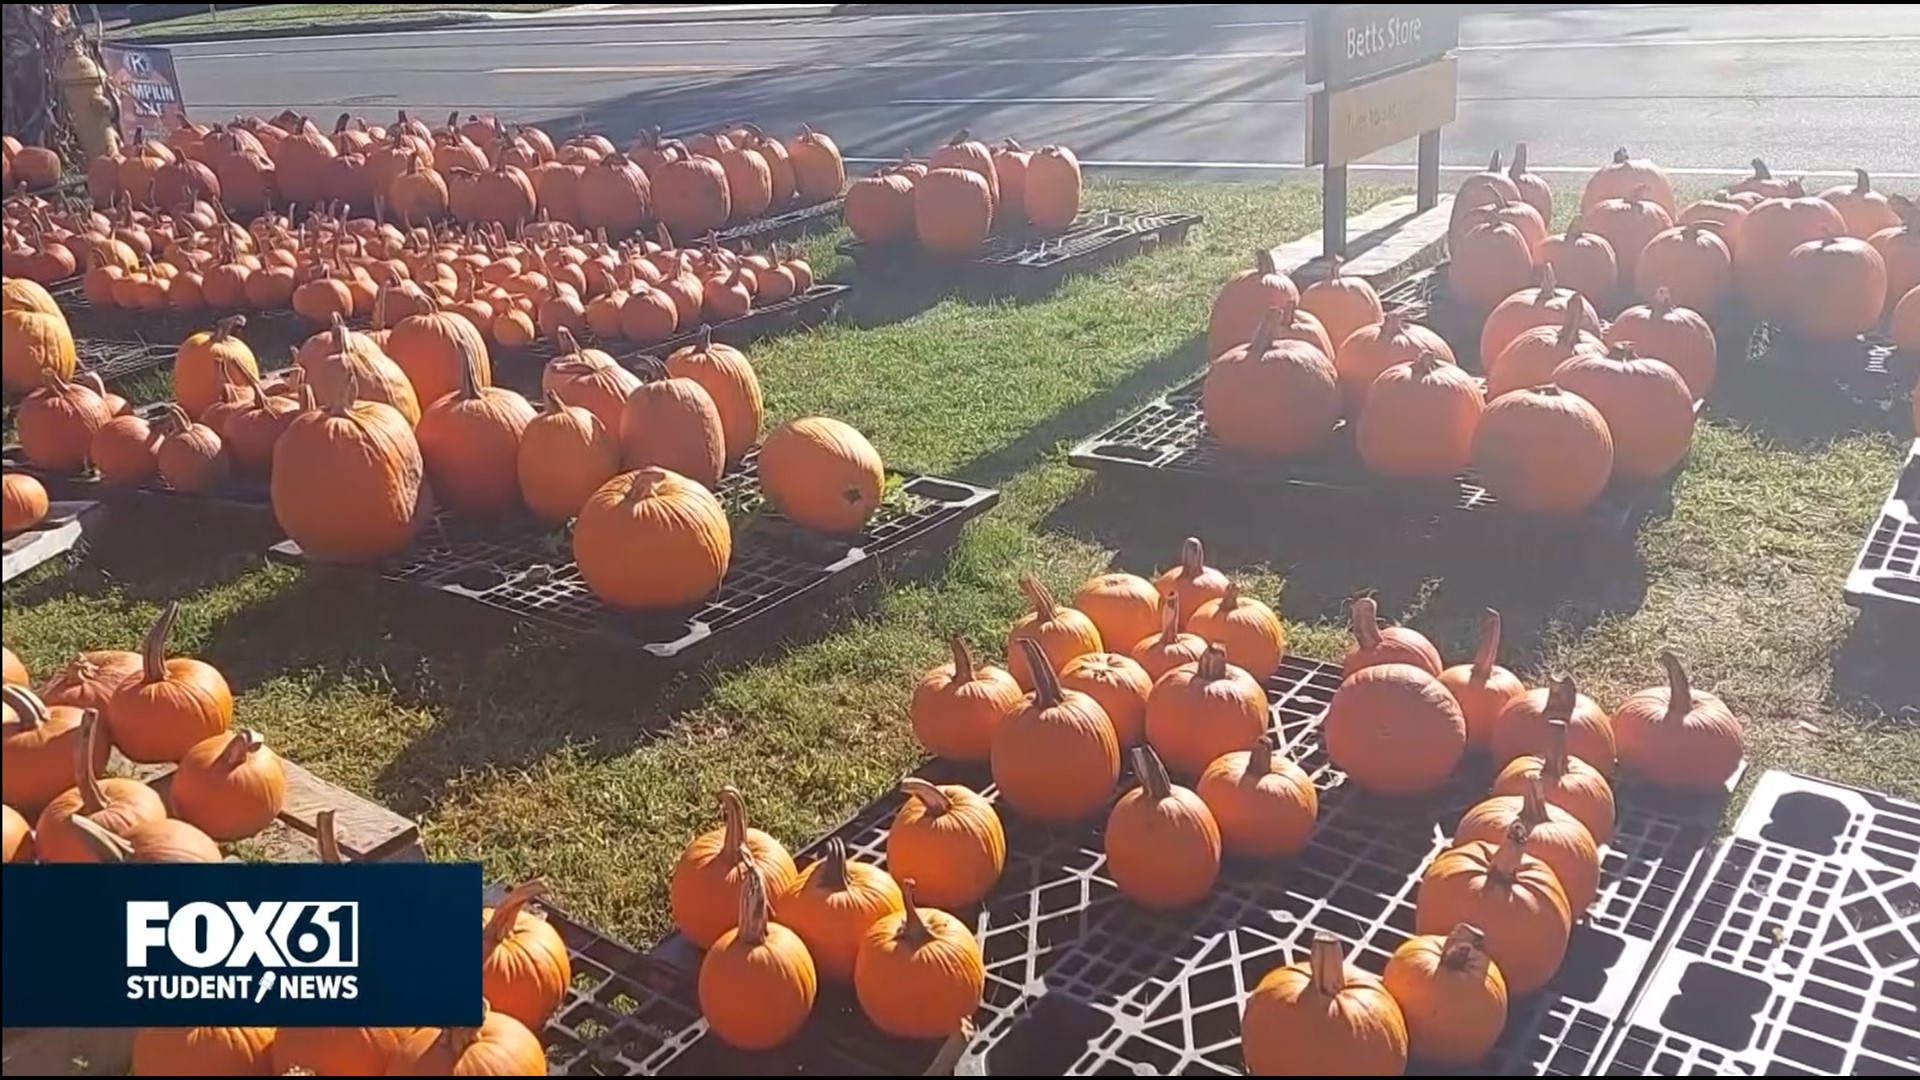 Each year, the proceeds from the pumpkin patch grow larger with the support of the community.